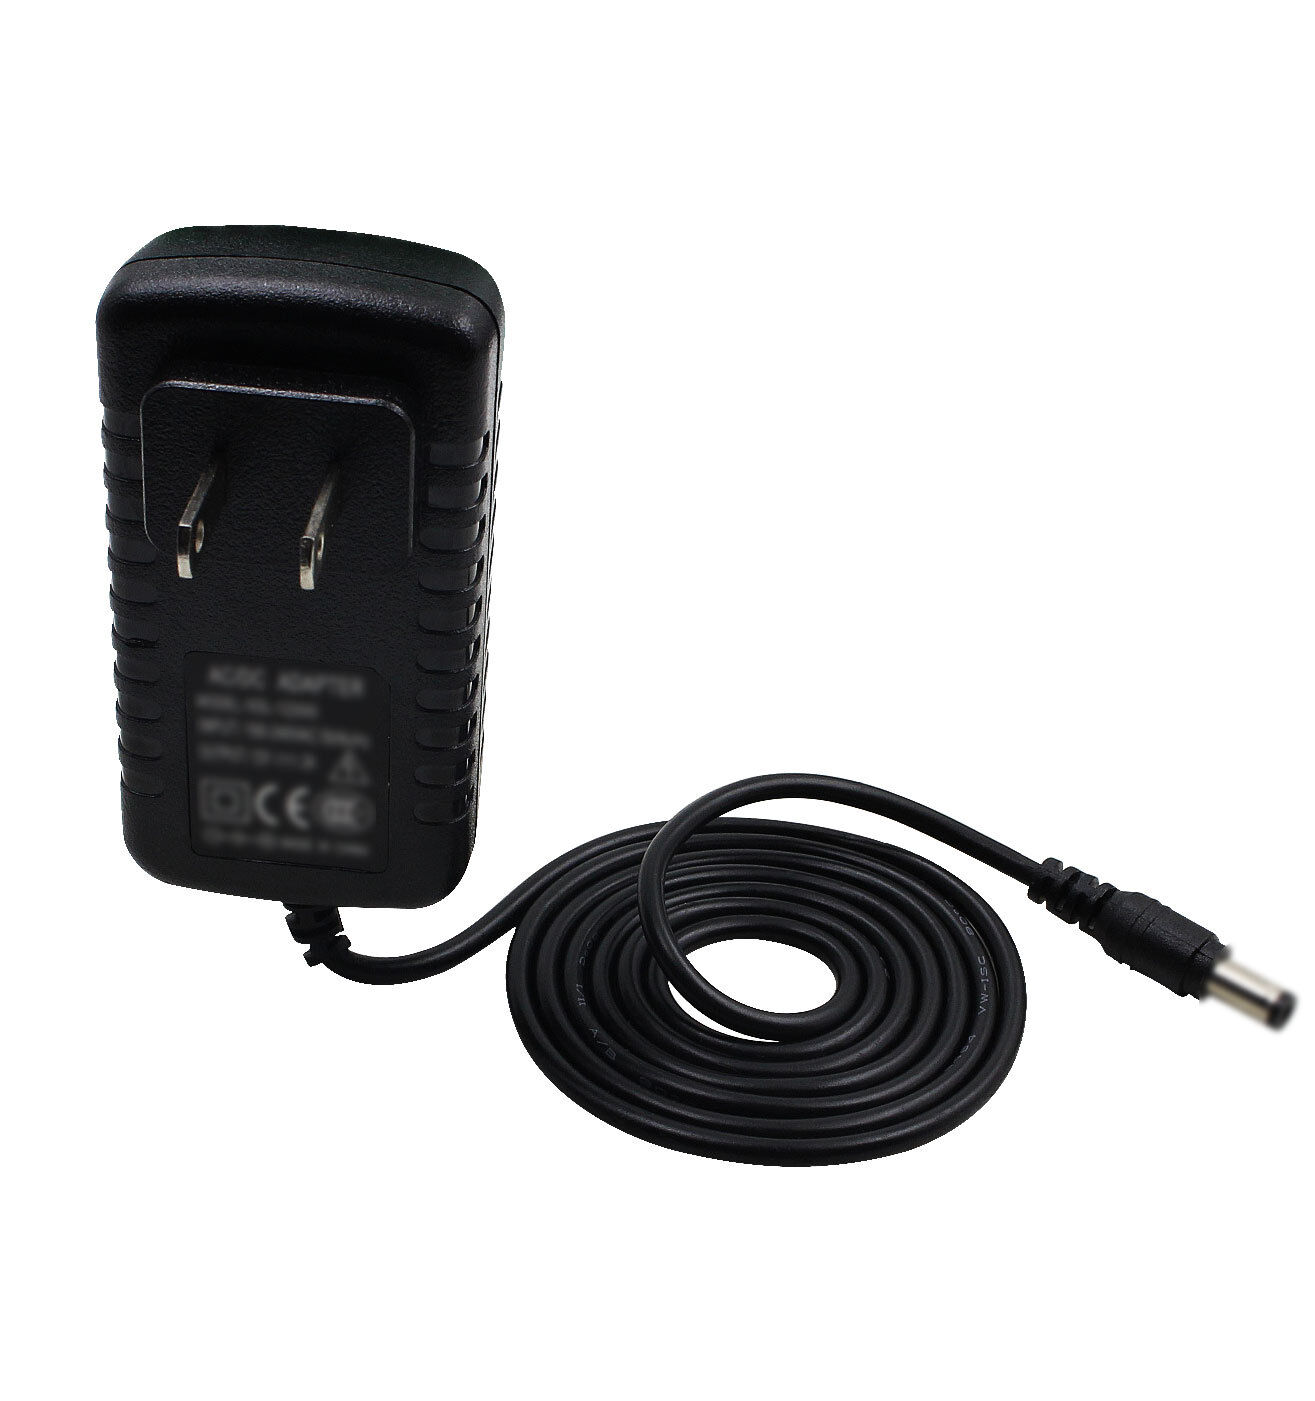 AC Power Supply Adapter Cord For Delphi SA10109 XM Roady 2 Personal Audio System Connection Split/Duplication 1:5 Type